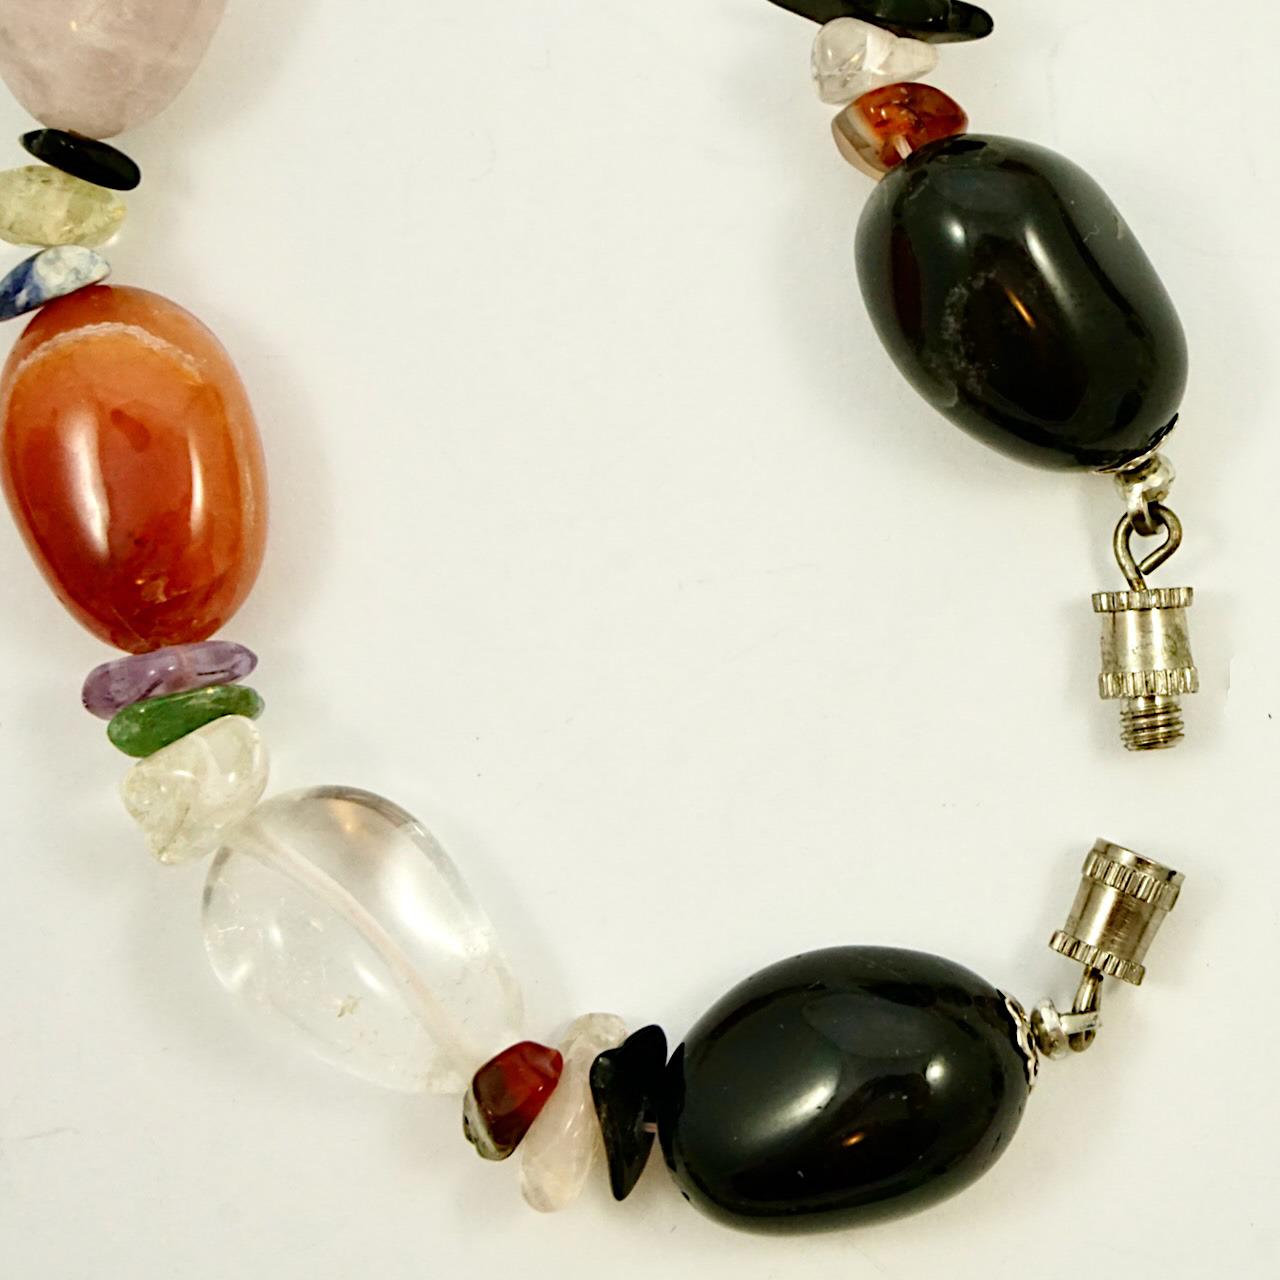 Polished Gemstone Necklace including Rose Quartz, Amethyst and Agate Beads For Sale 4